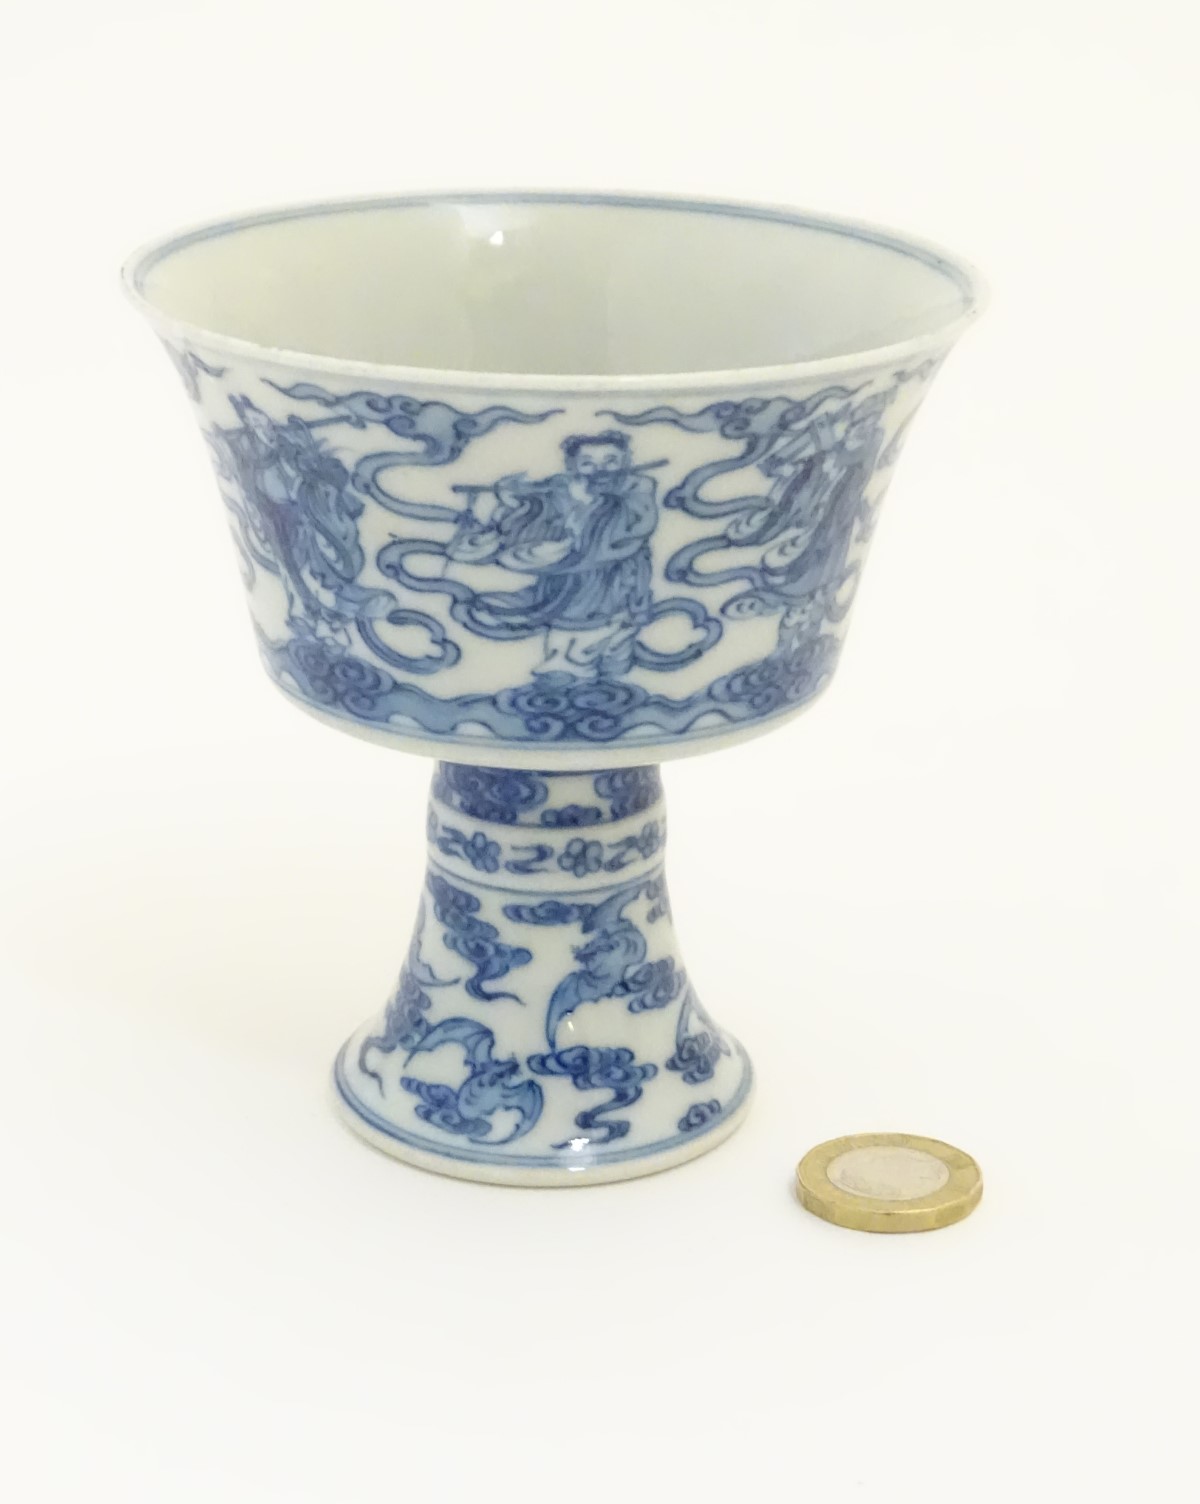 A Chinese blue and white stem cup / high footed cup decorated with stylised clouds, - Image 5 of 8